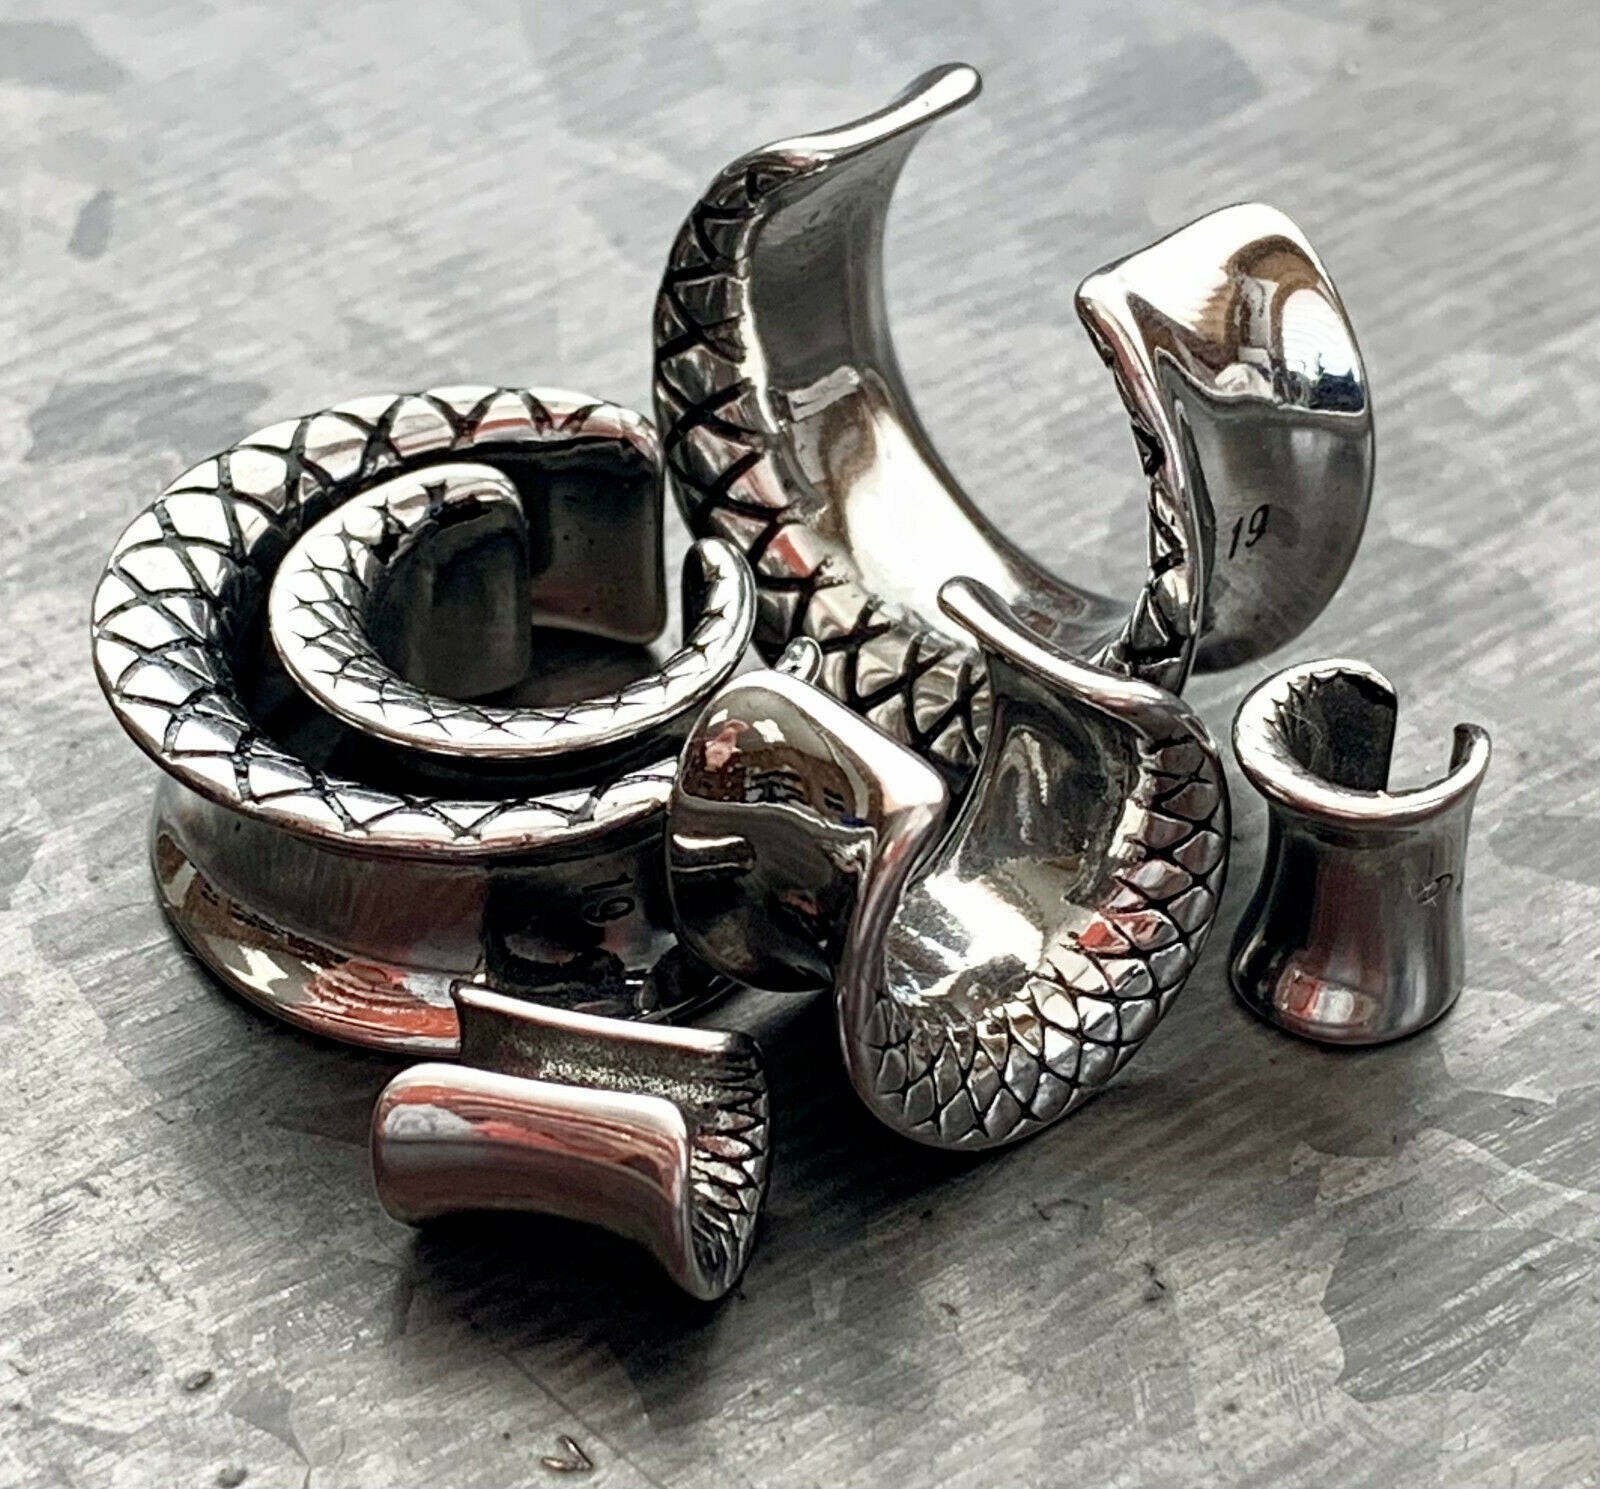 PAIR of Unique Snake Skin Style Surgical Steel Saddle Ear Spreaders Plugs - Gauges 2g (6.5mm) thru 3/4" (19mm) available!